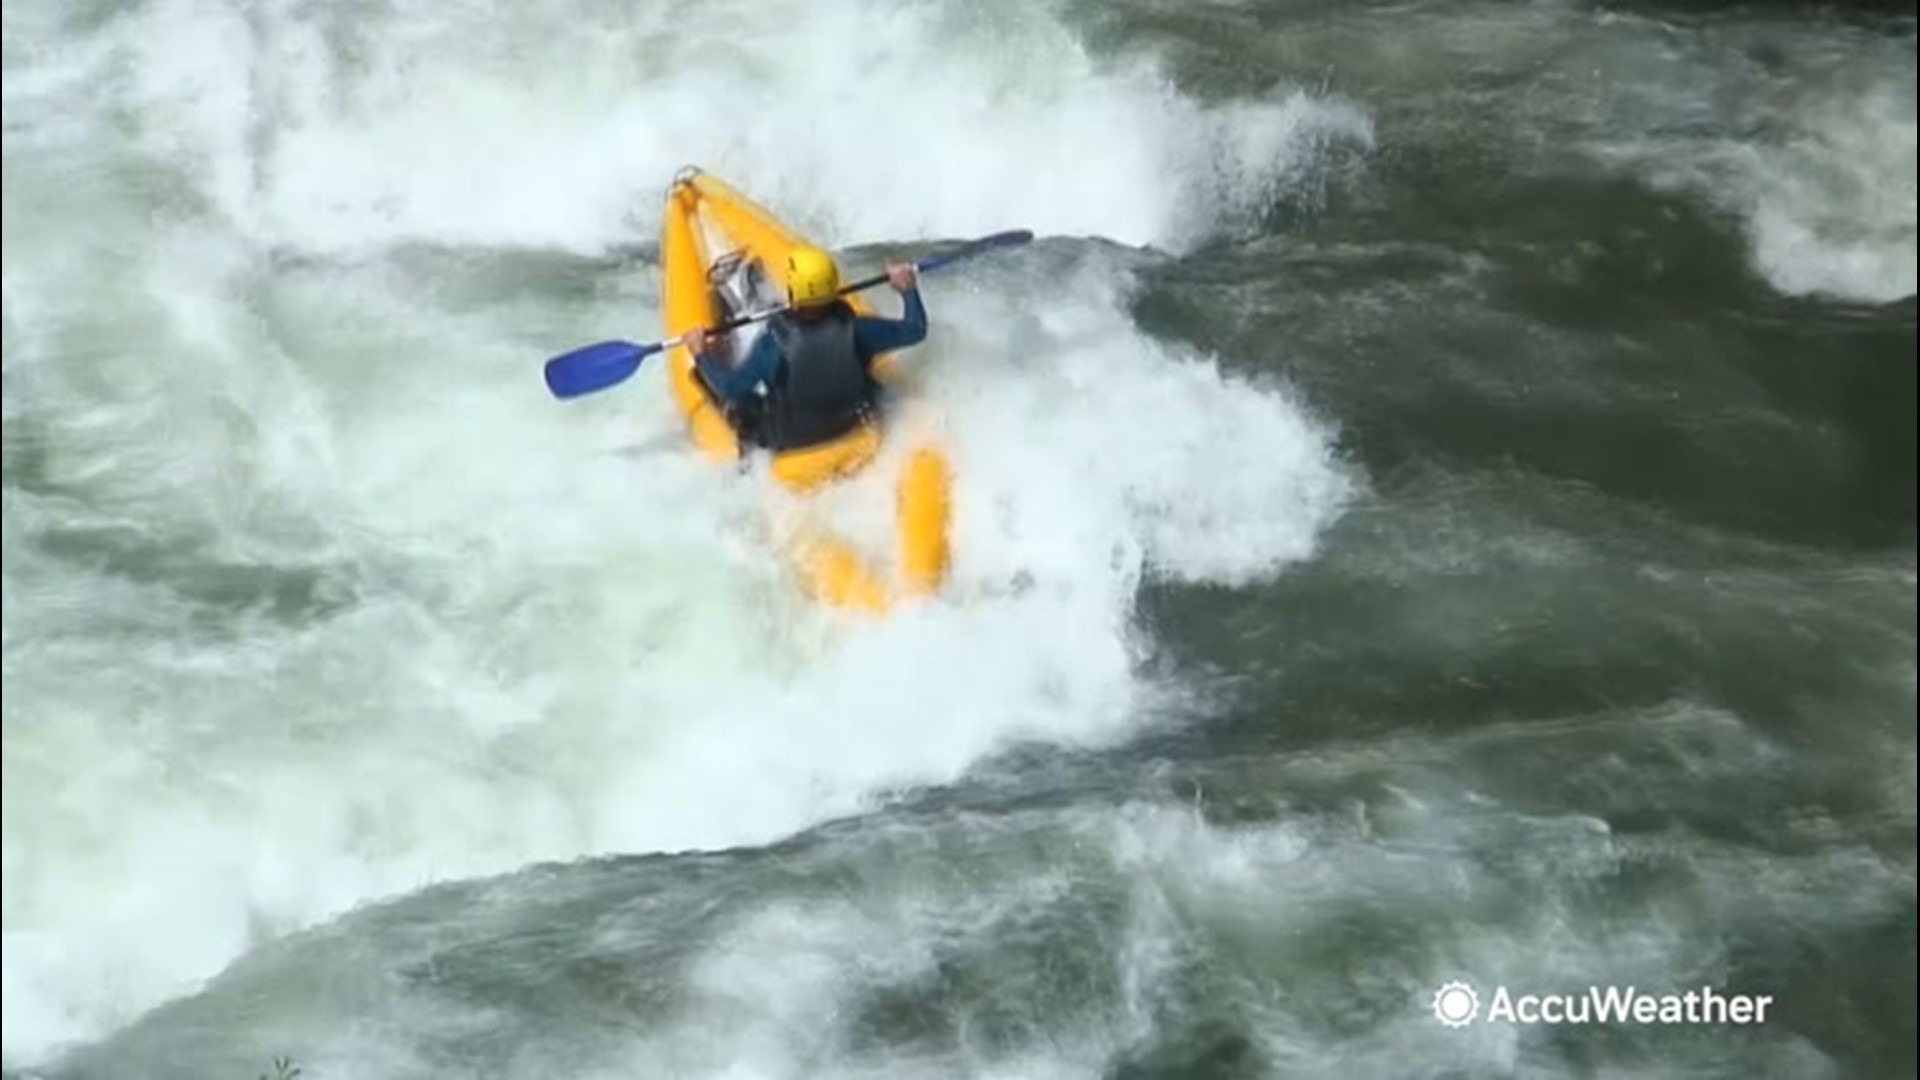 AccuWeather's Dexter Henry shows us how Mother Nature can impact the outdoor paddle sport - kayaking.